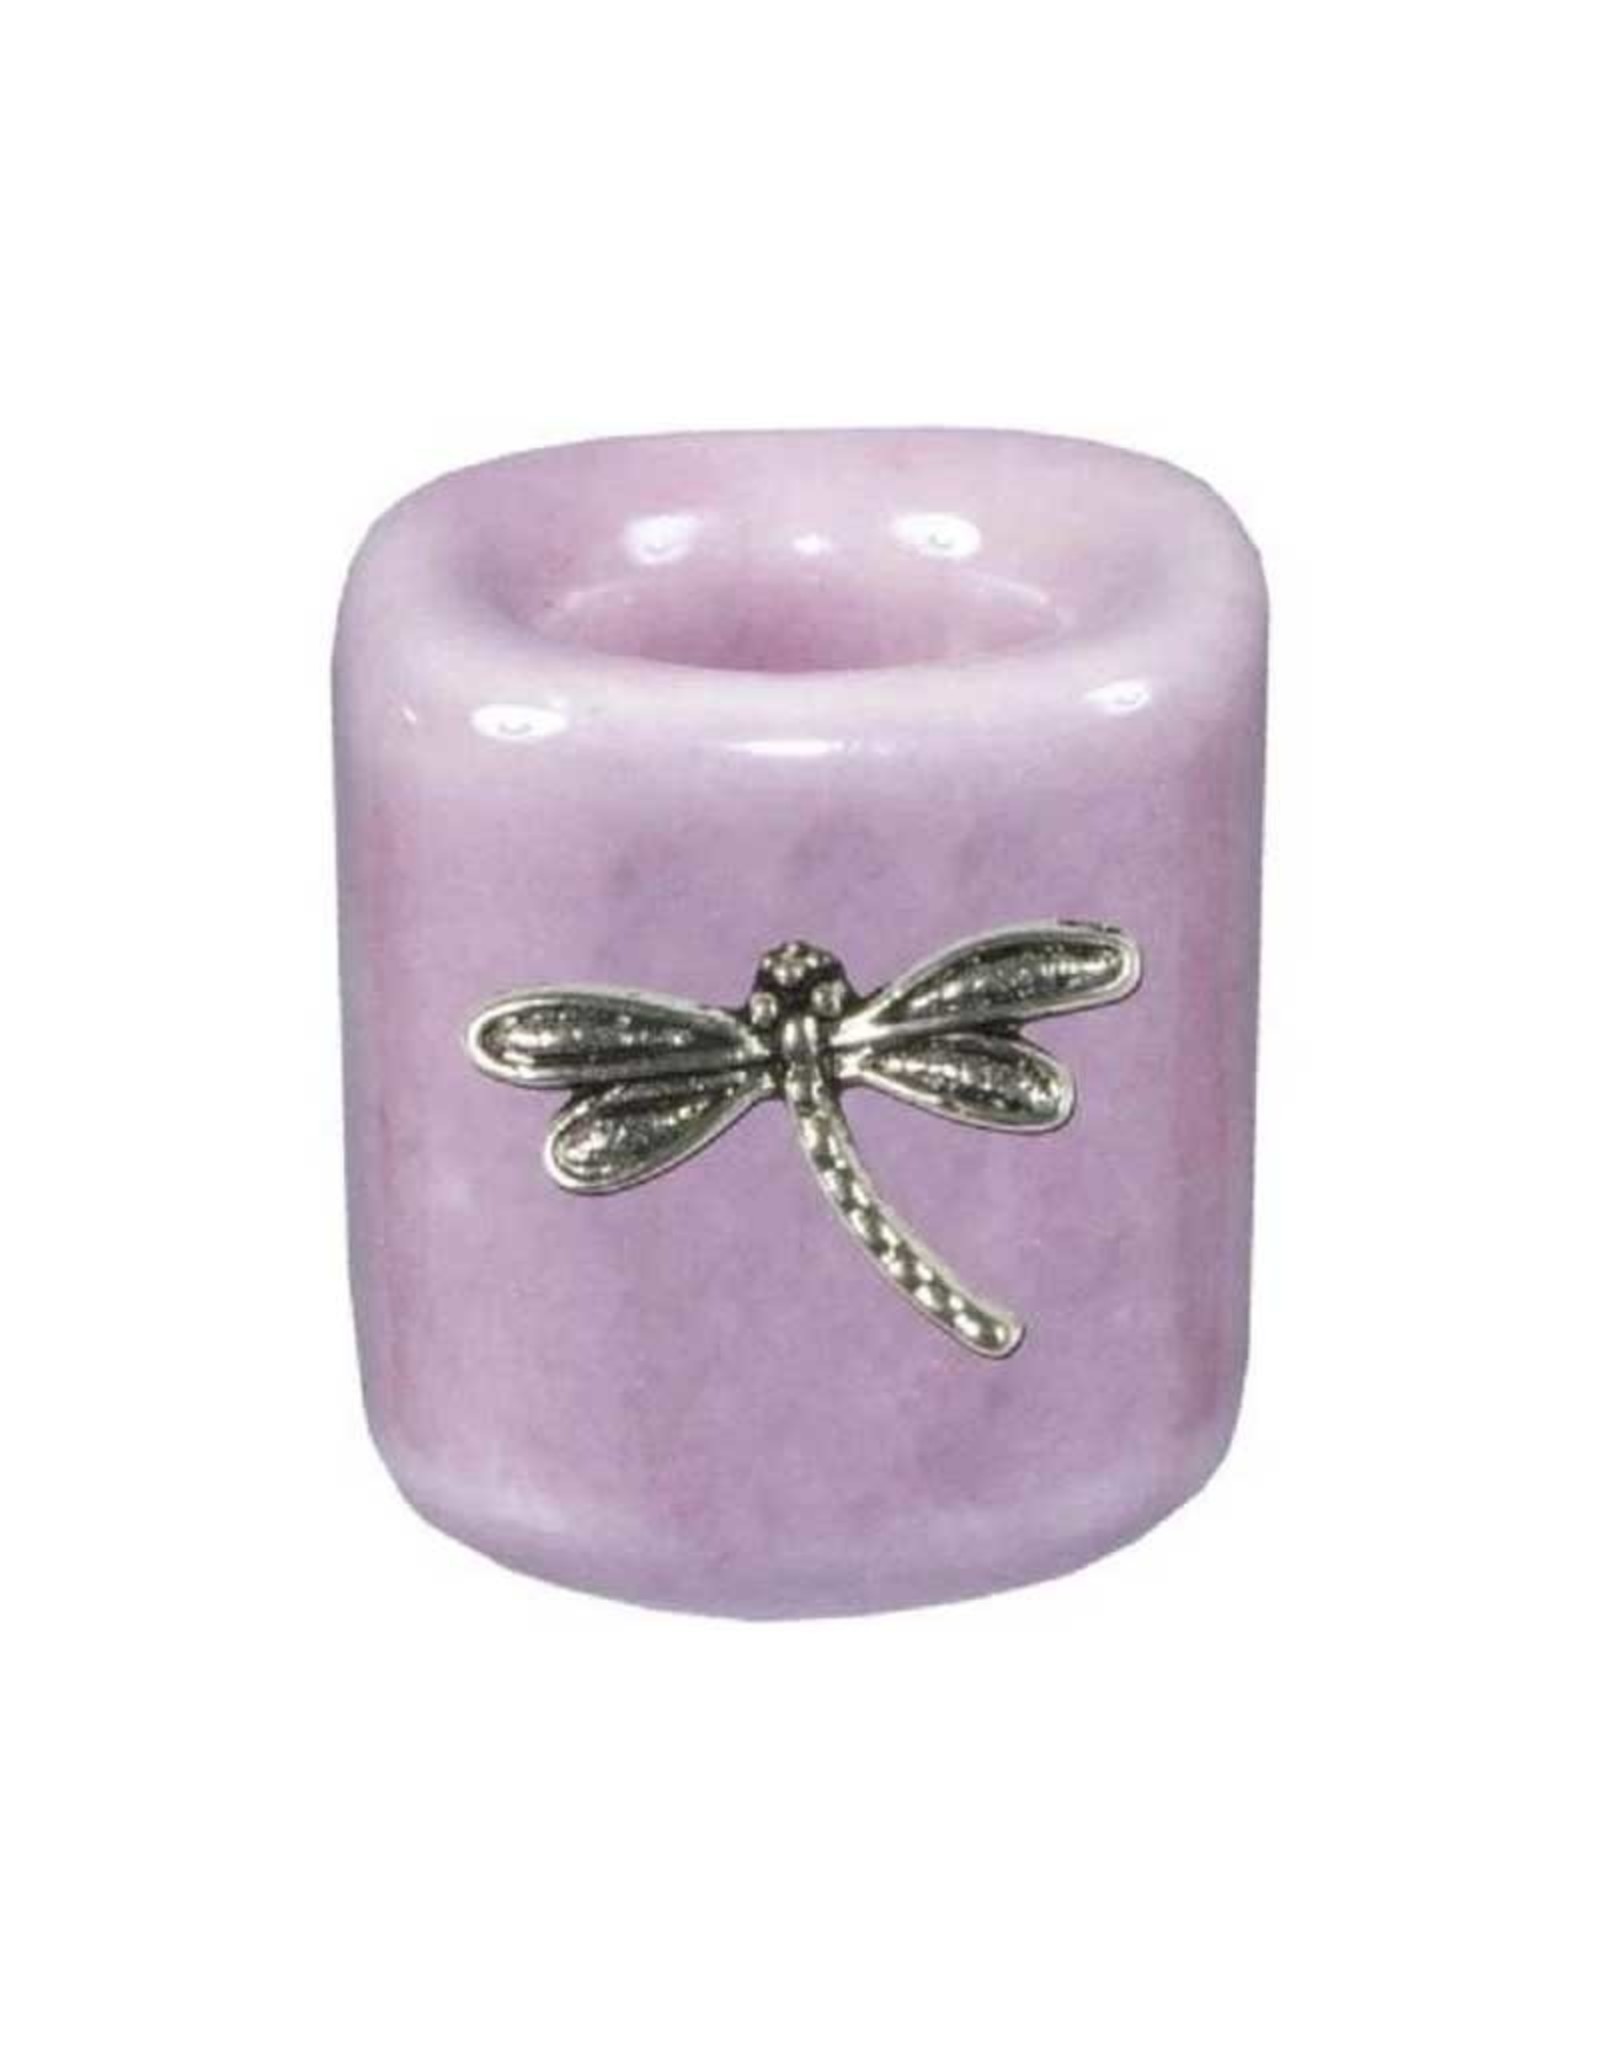 Mini Candle Holder Dragonfly